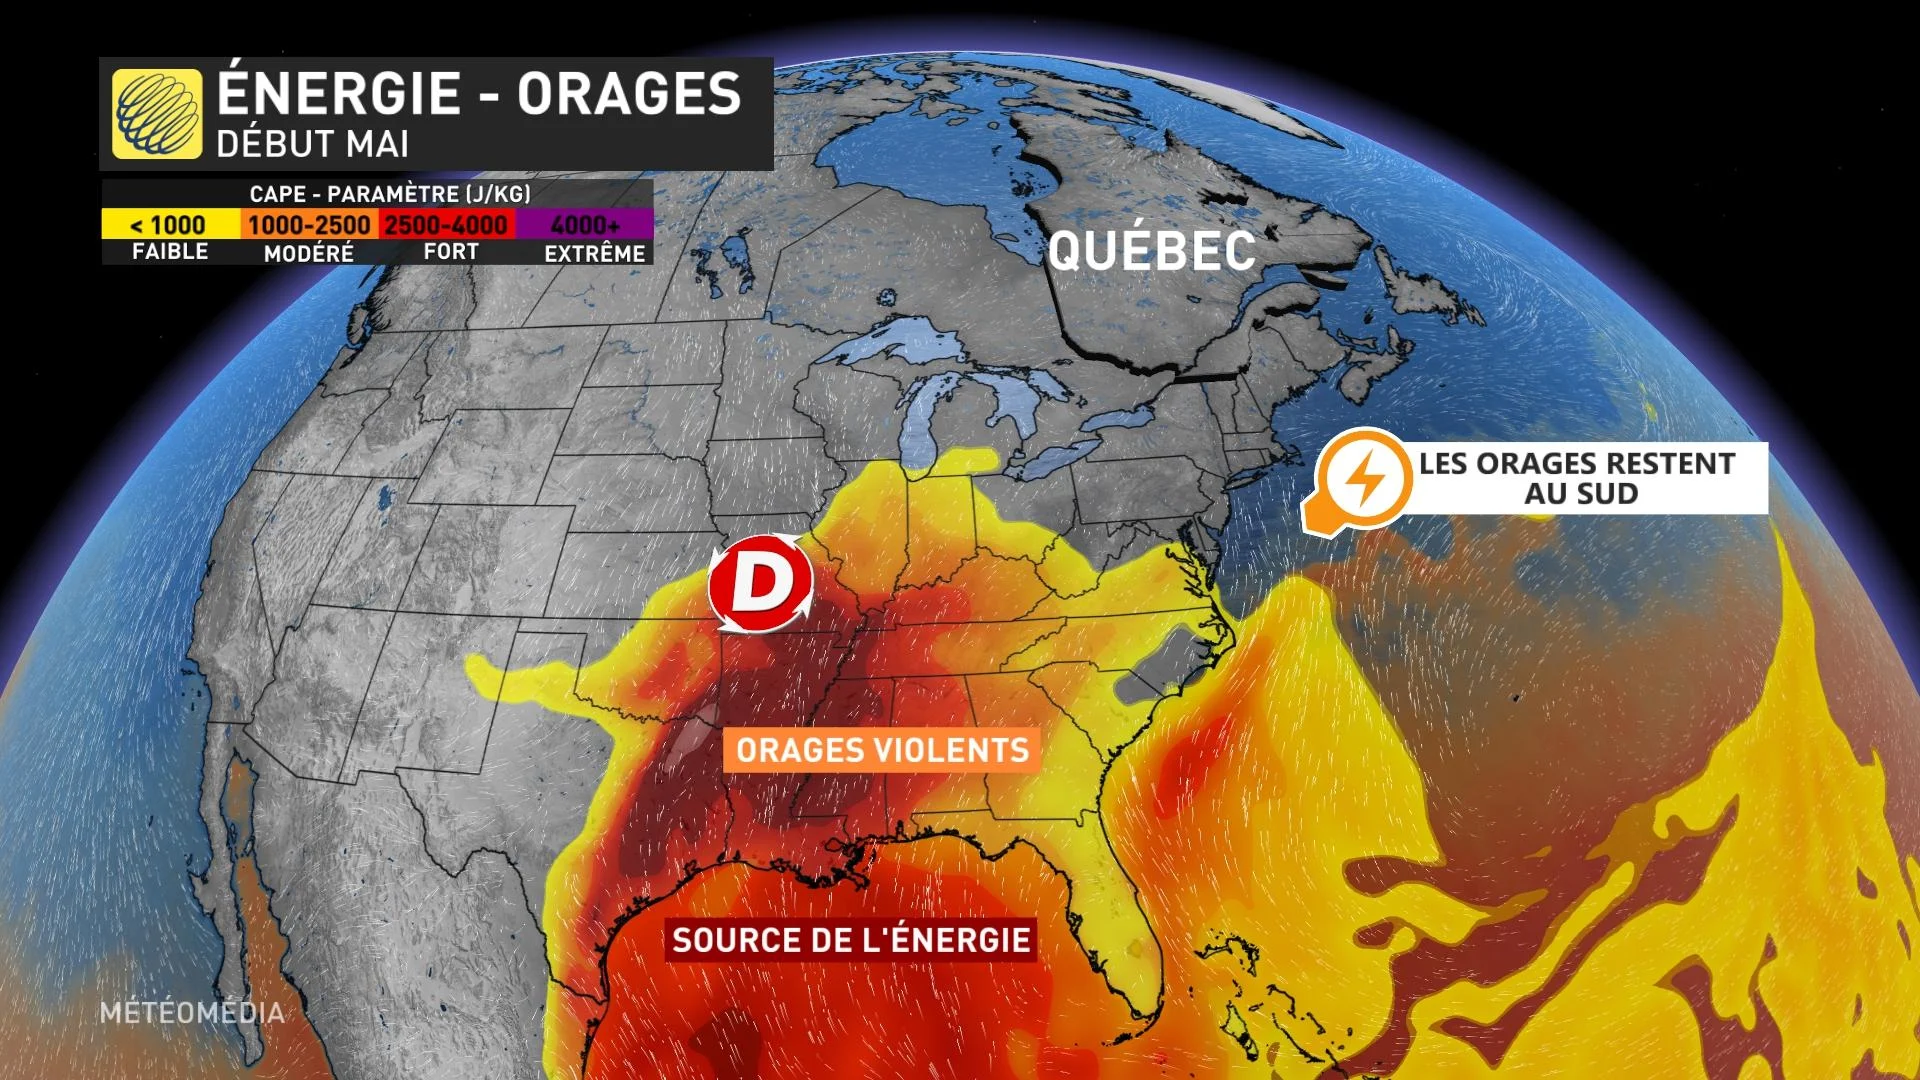 orages debut mai